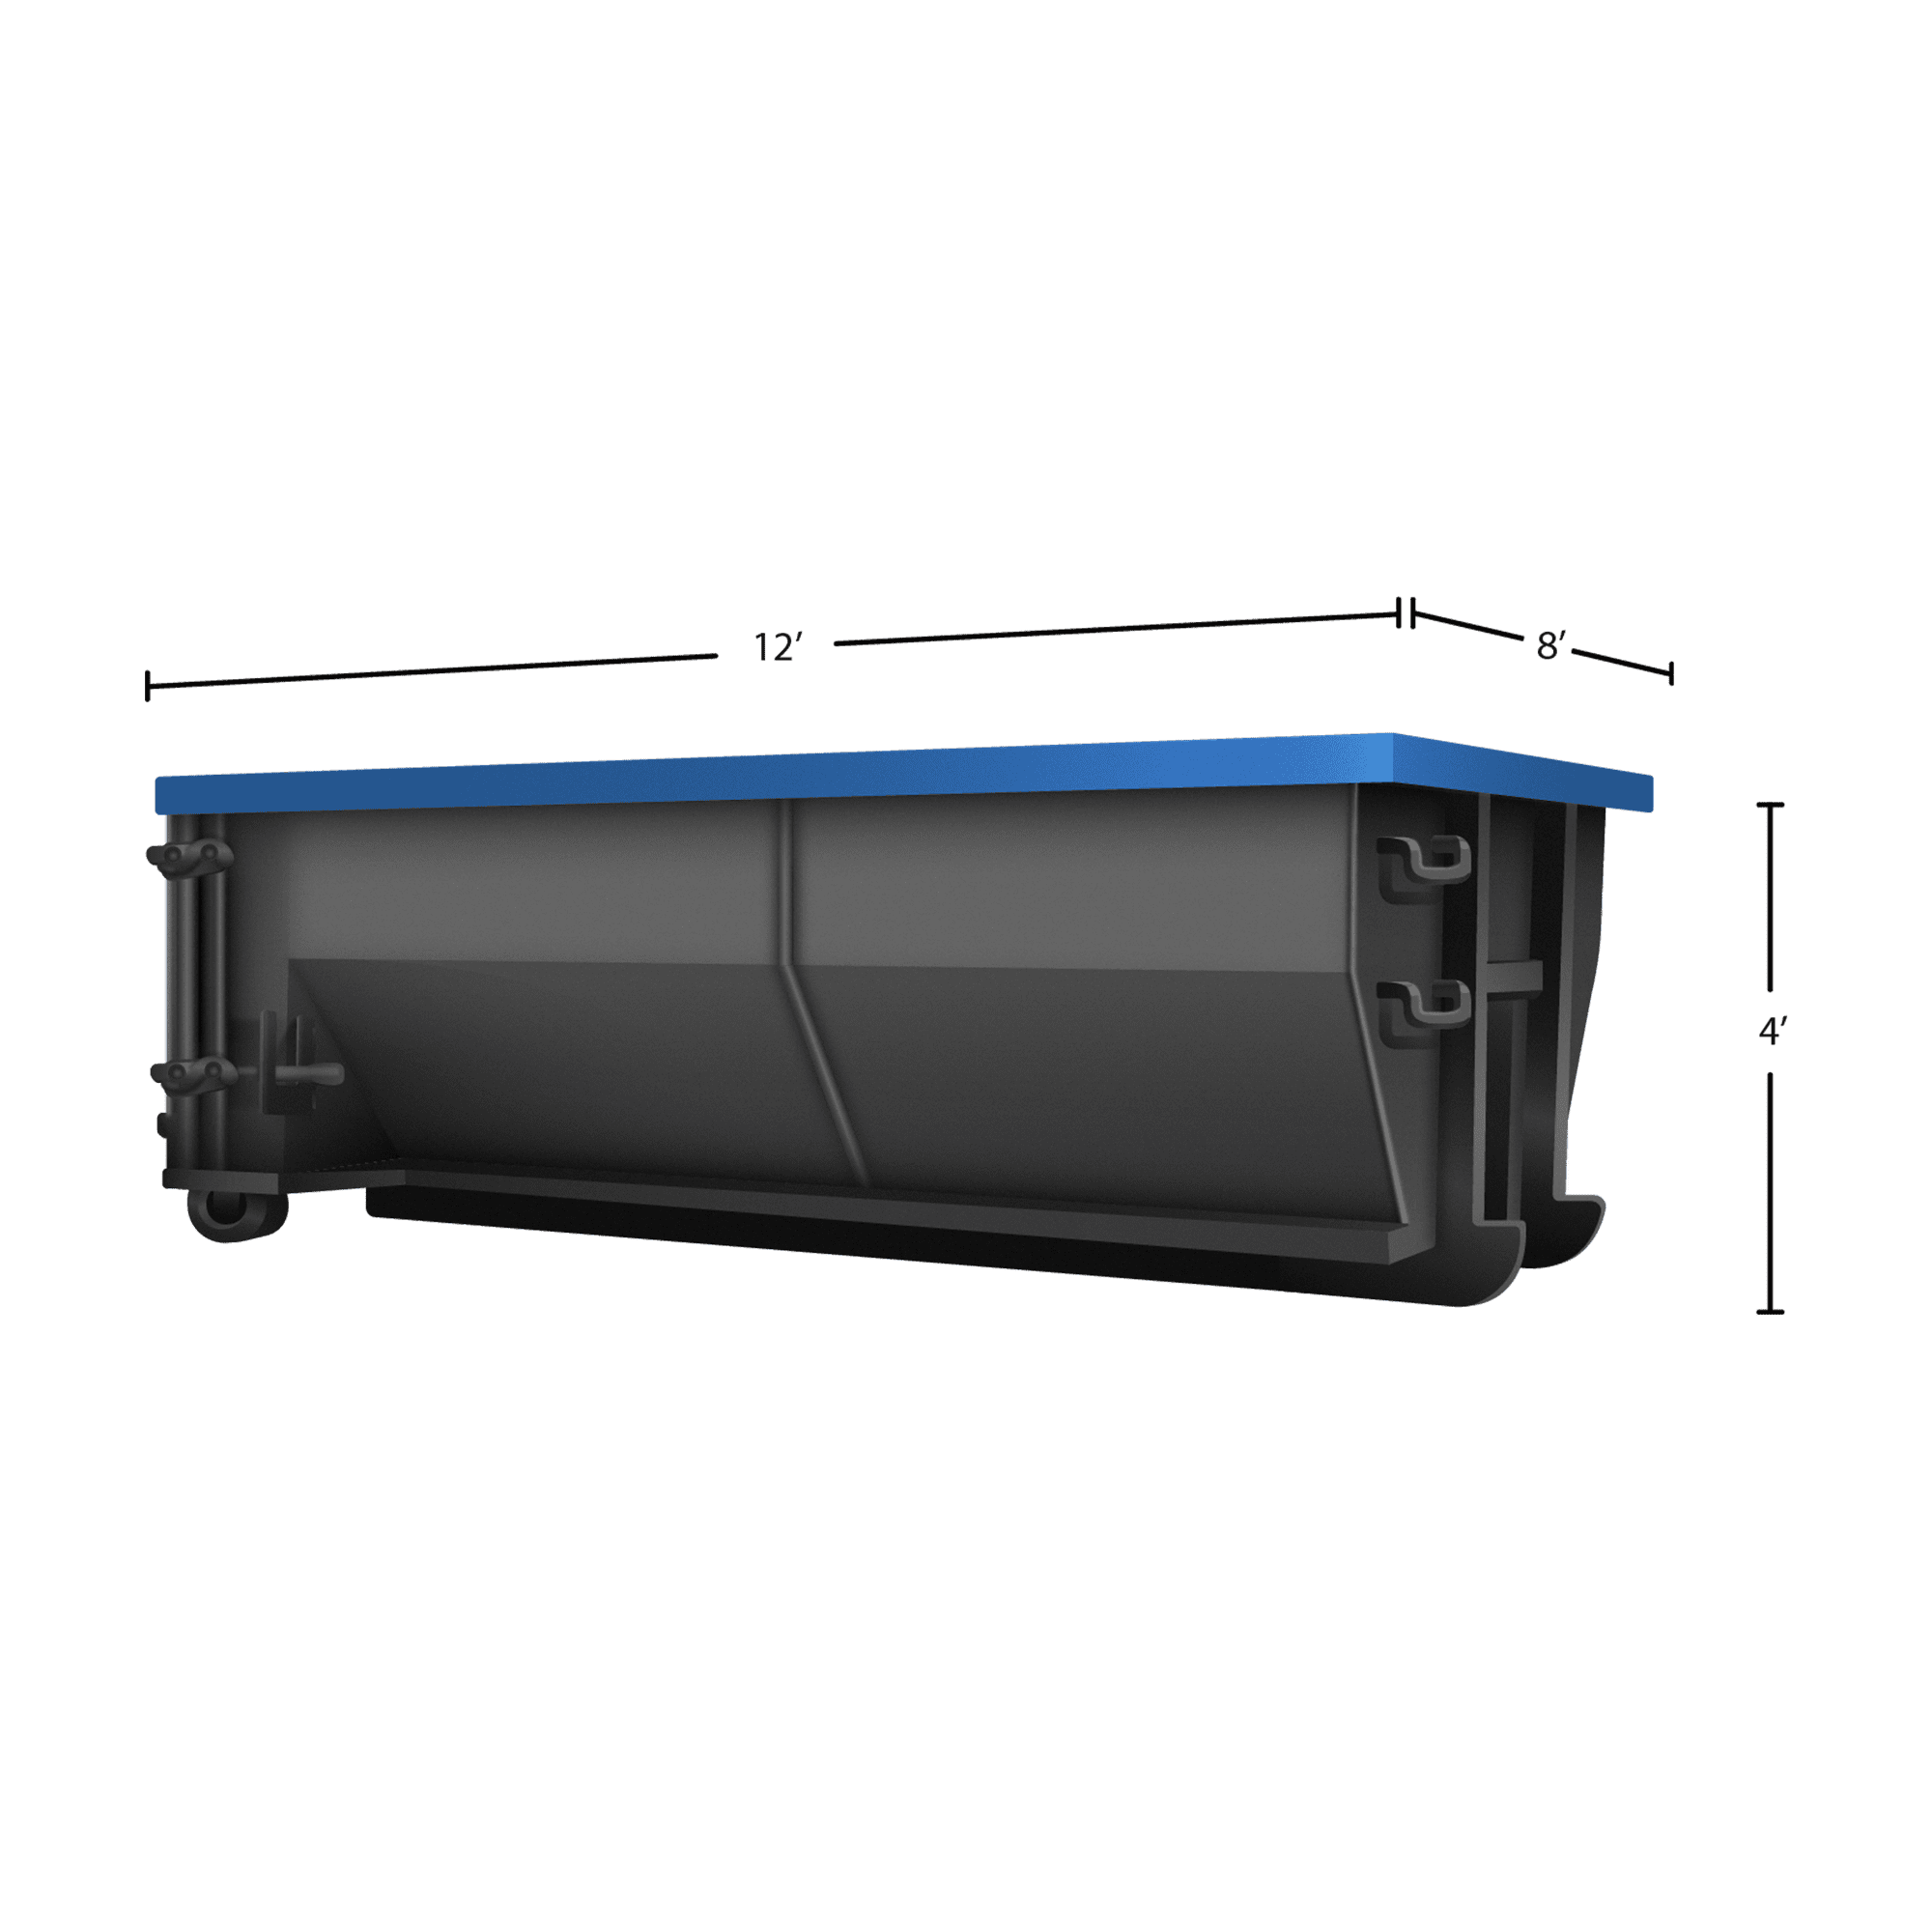 Black roll-off dumpster with blue trim with the dimensions shown: 12' L x 4' H x 8' W